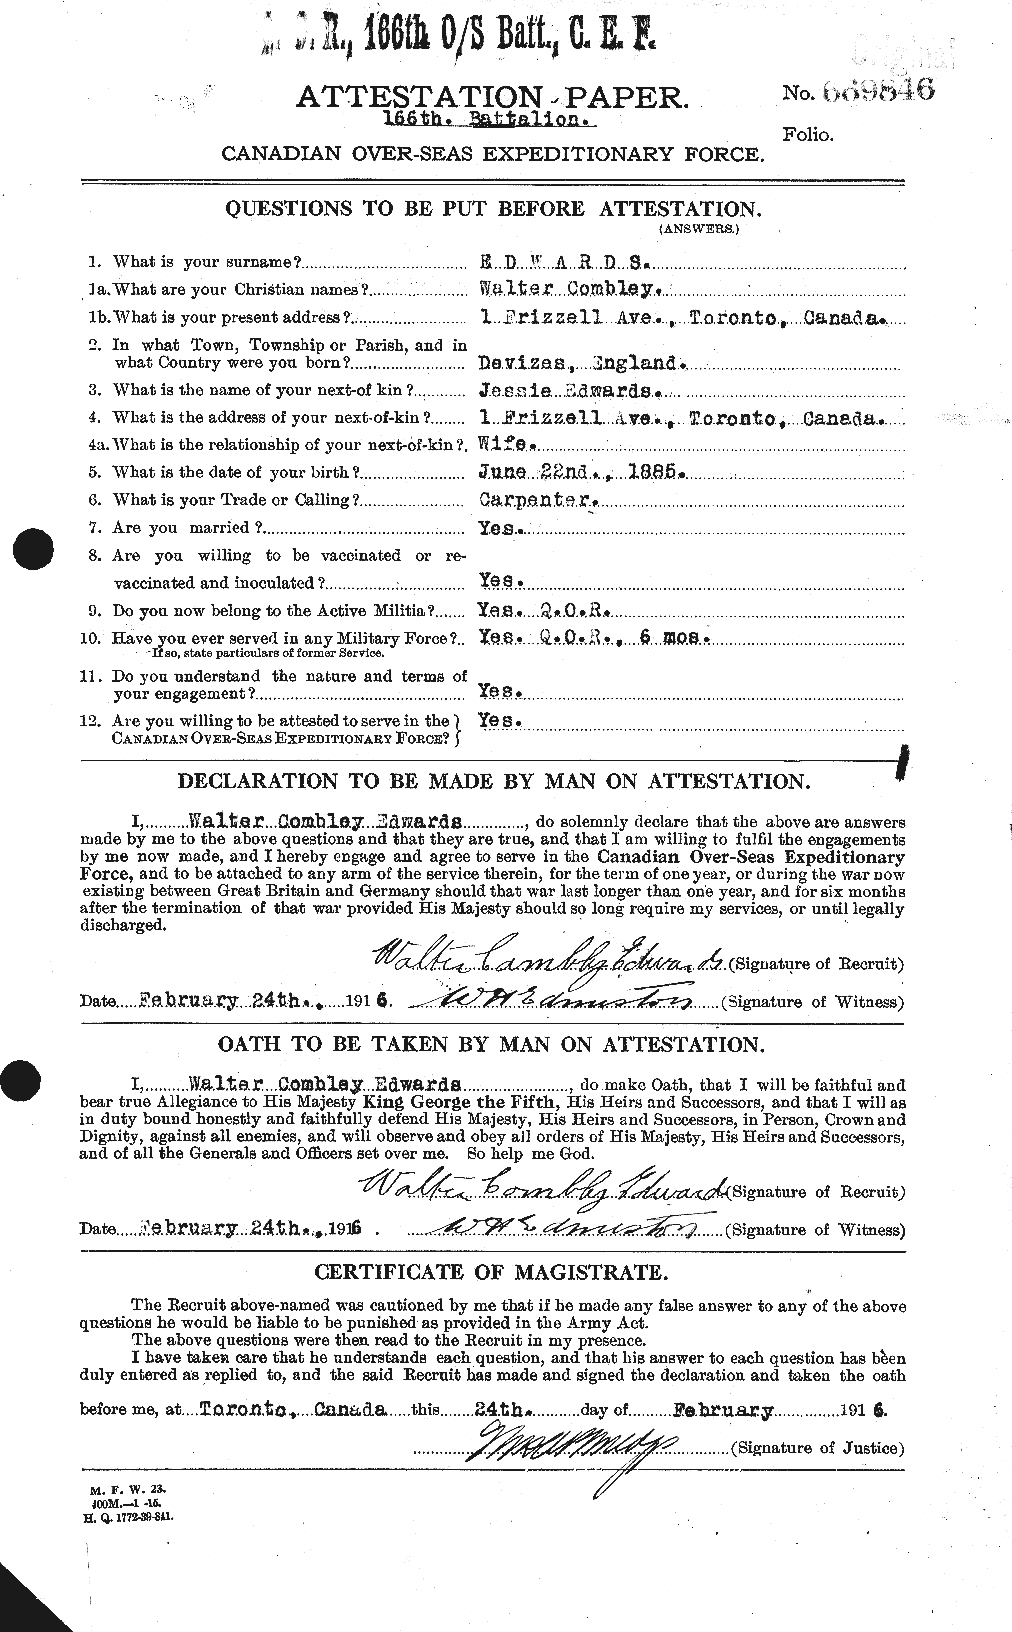 Personnel Records of the First World War - CEF 310368a